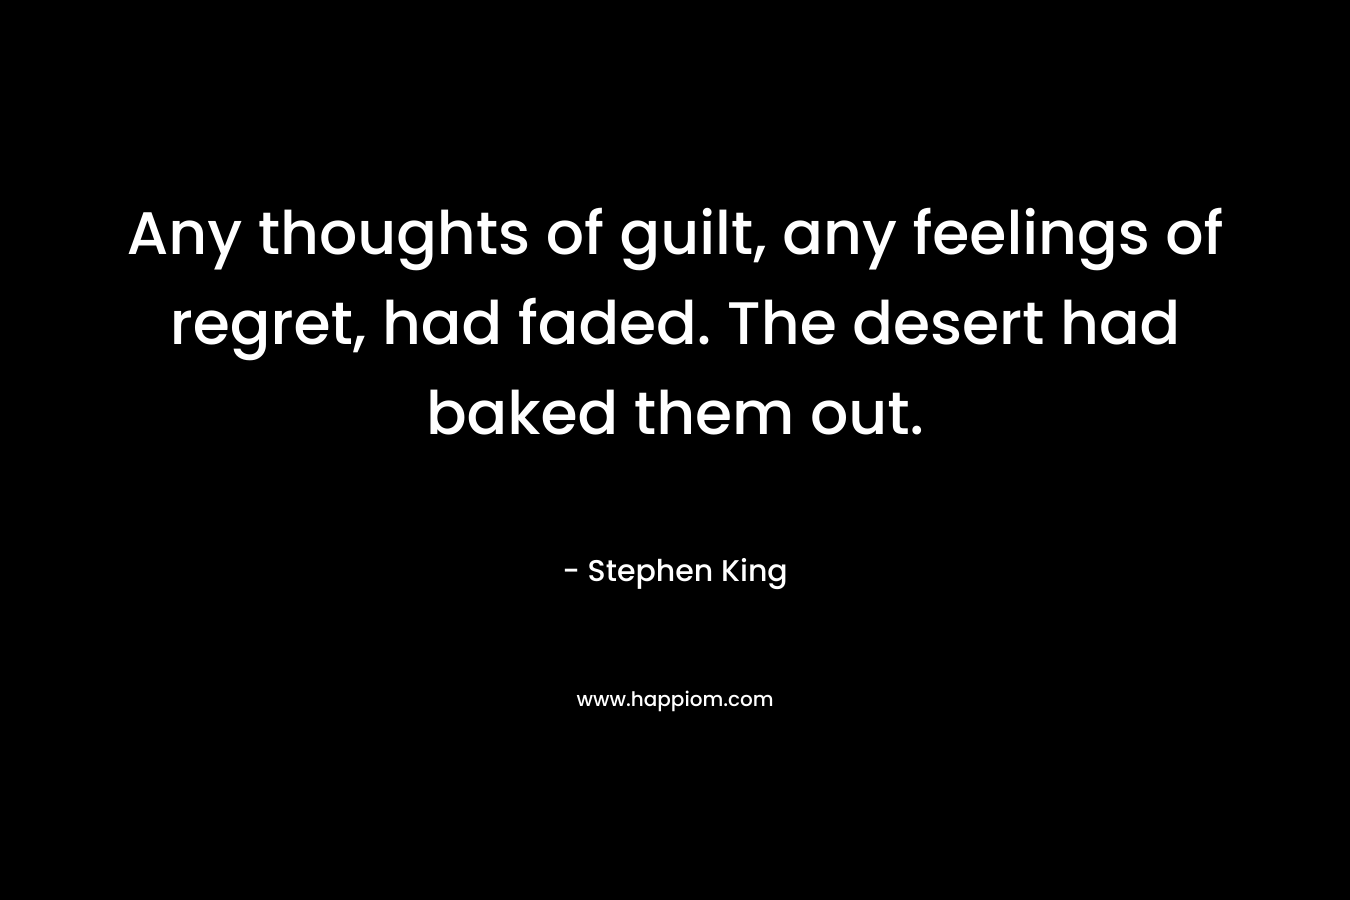 Any thoughts of guilt, any feelings of regret, had faded. The desert had baked them out.